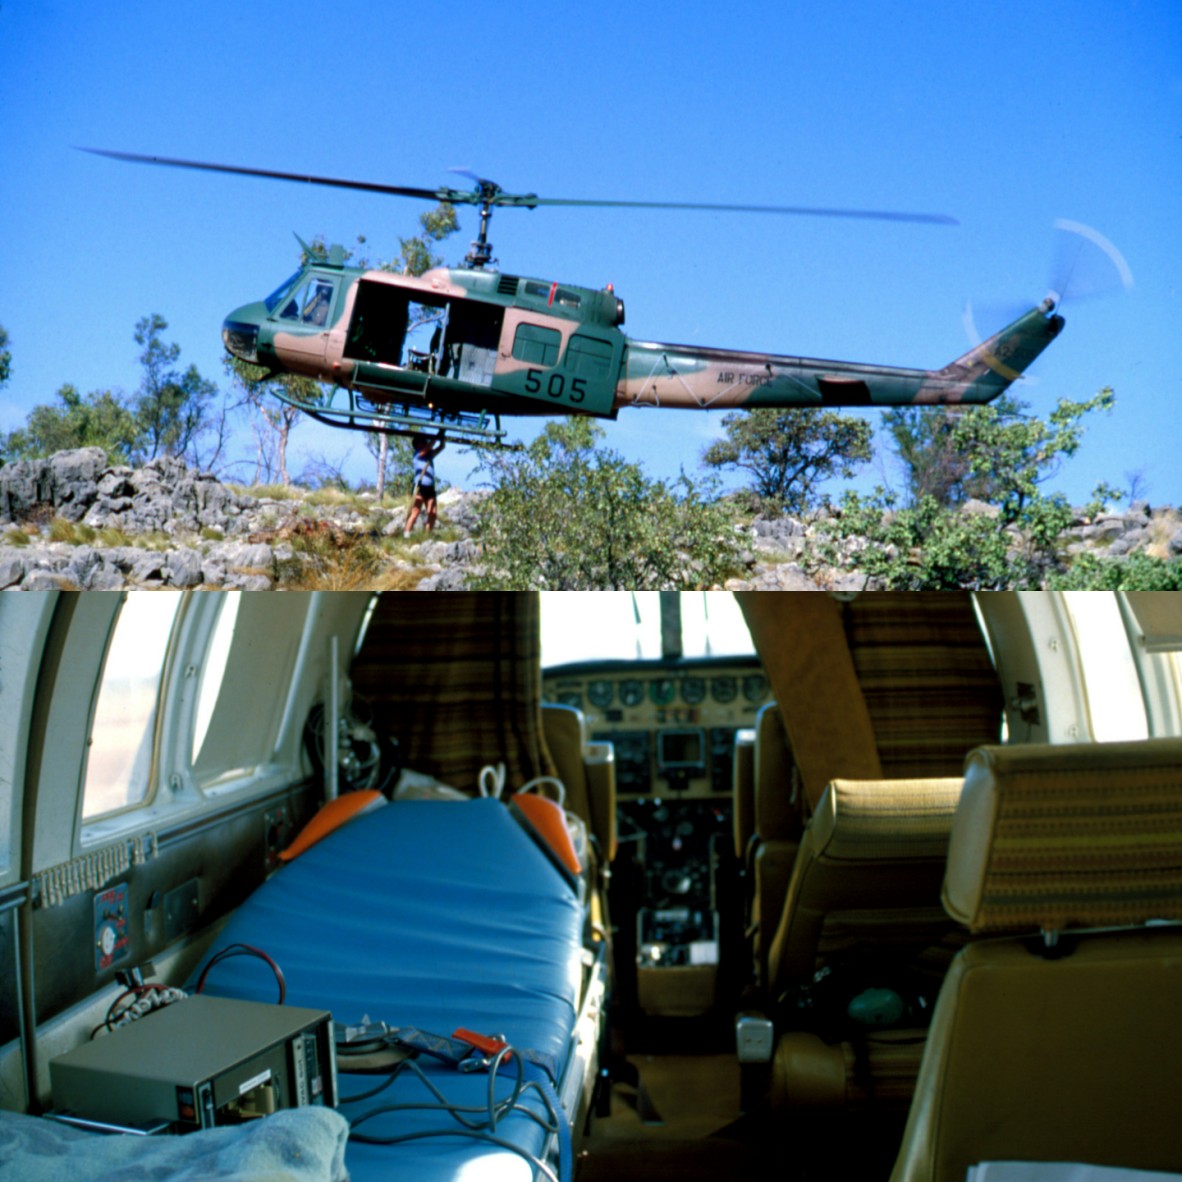 Split image of an army helicopter collecting rocks and the inside of a Royal Flying Doctor aircraft 